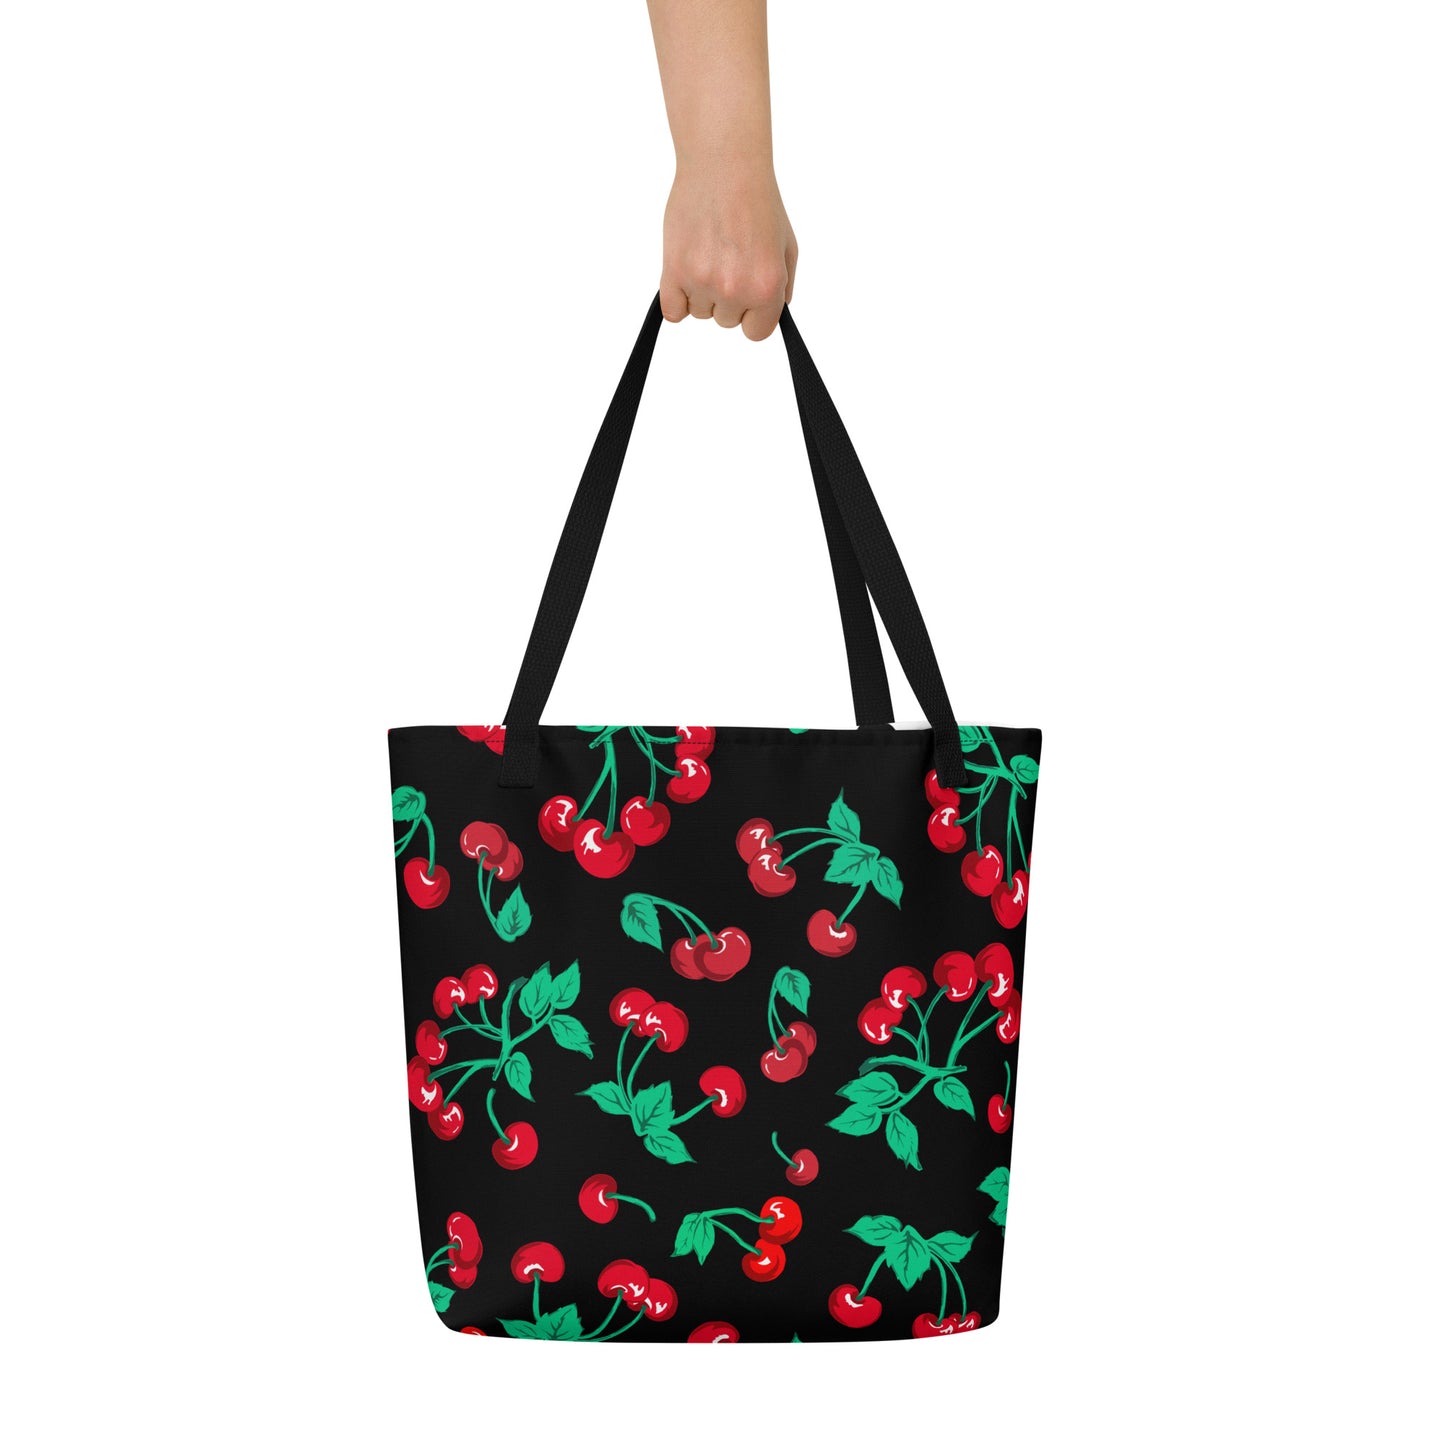 Bethany Cherry Girl Black Oversized Tote Bag | Pinup Couture Relaxed